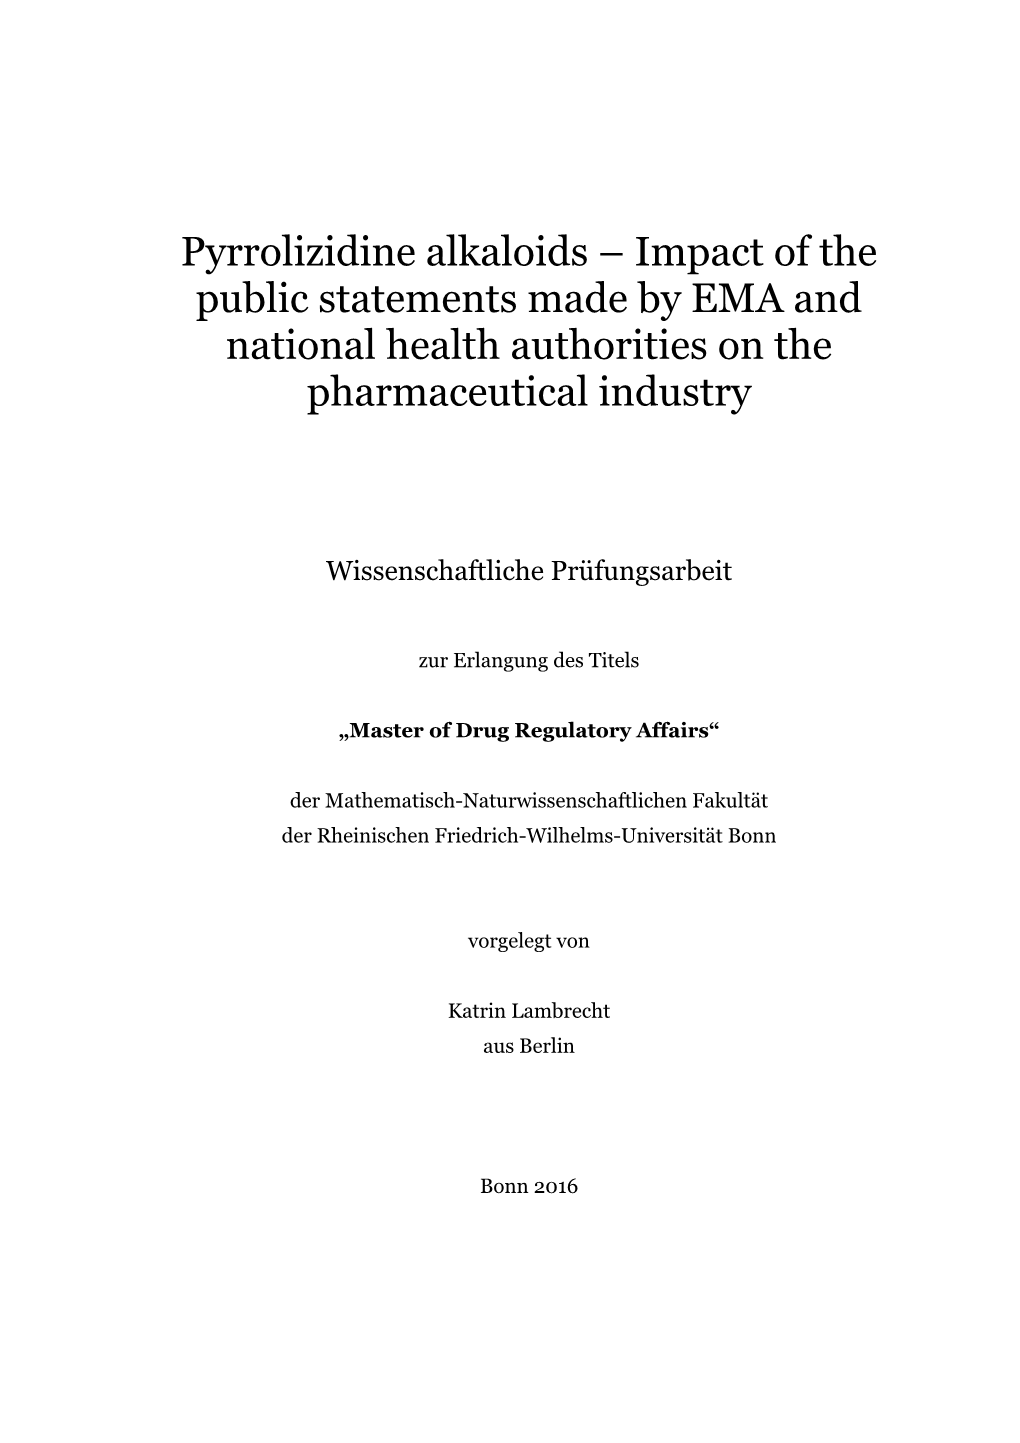 Pyrrolizidine Alkaloids – Impact of the Public Statements Made by EMA and National Health Authorities on the Pharmaceutical Industry